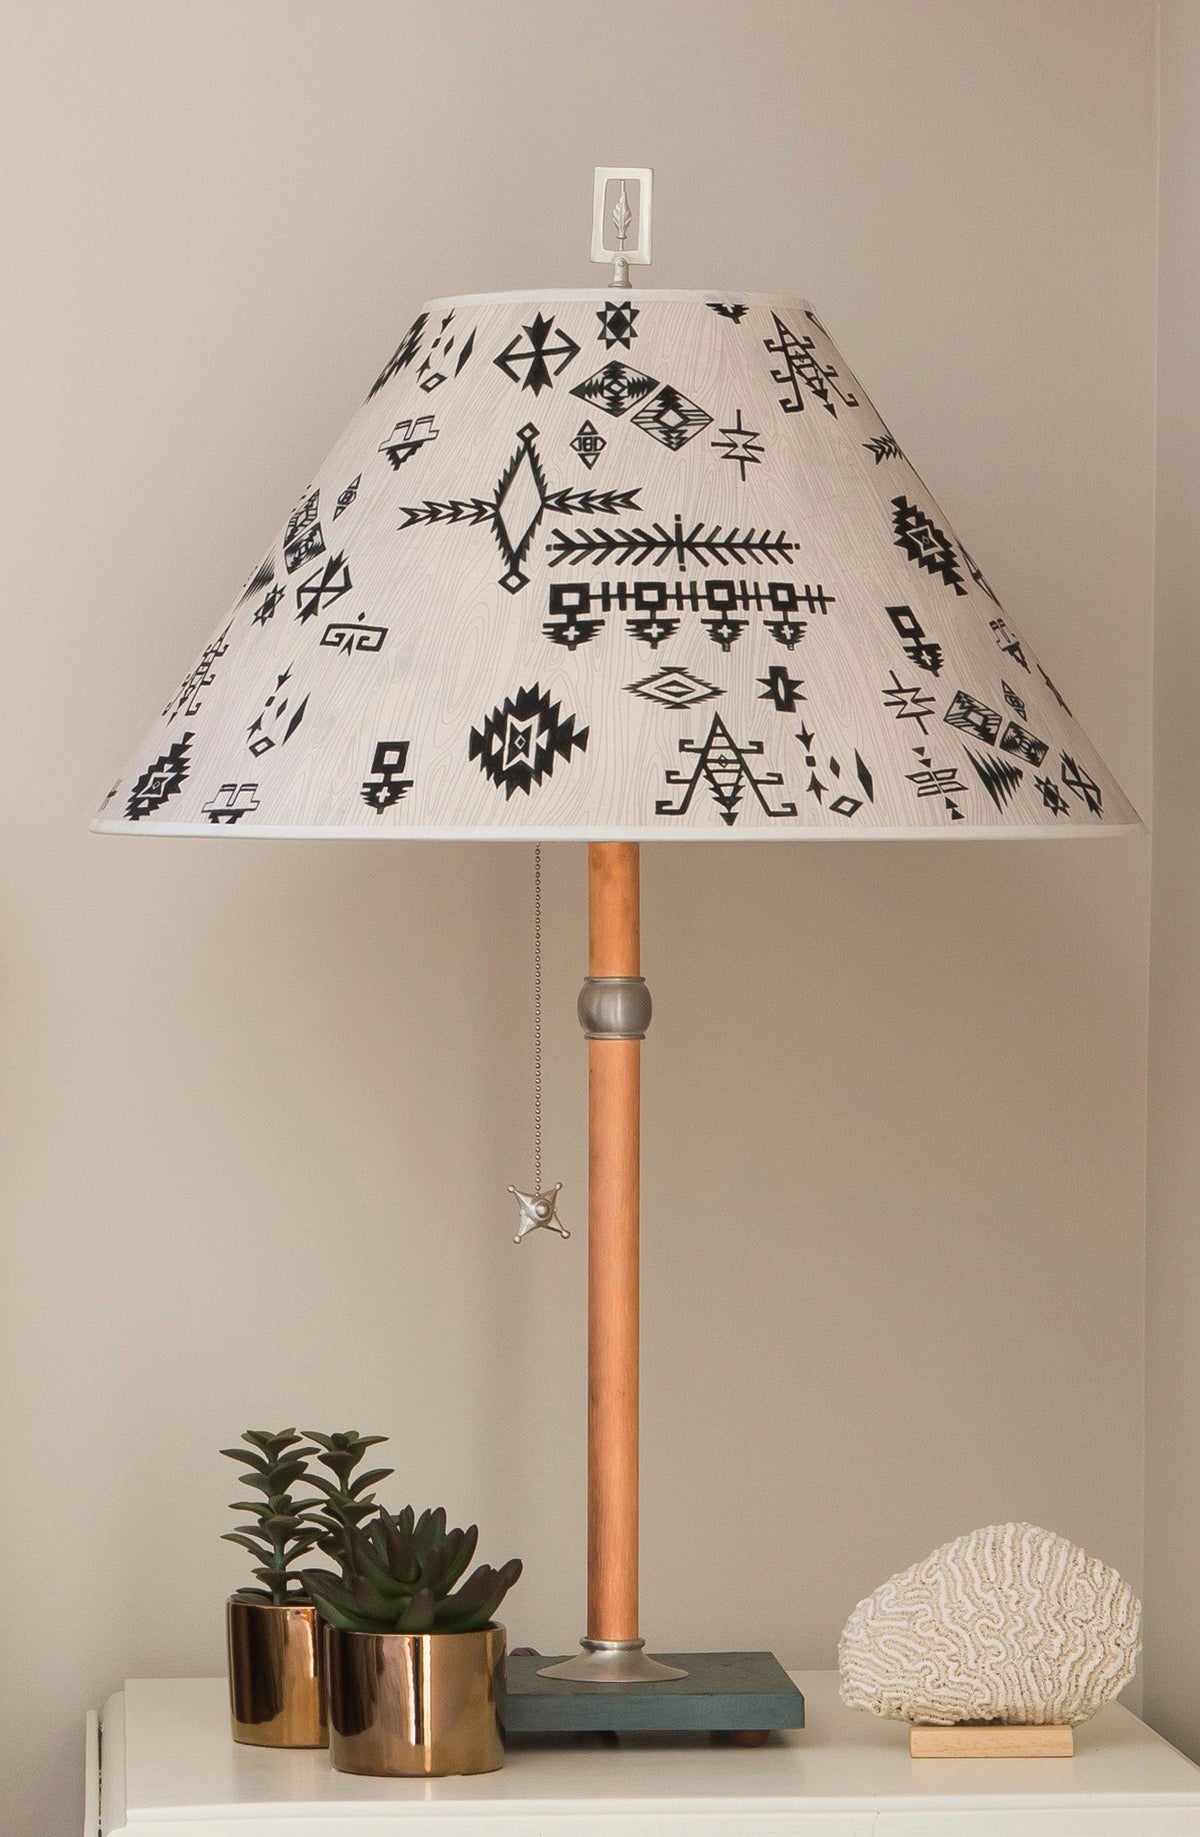 Copper Table Lamp with Large Conical Shade in Blanket Sketch